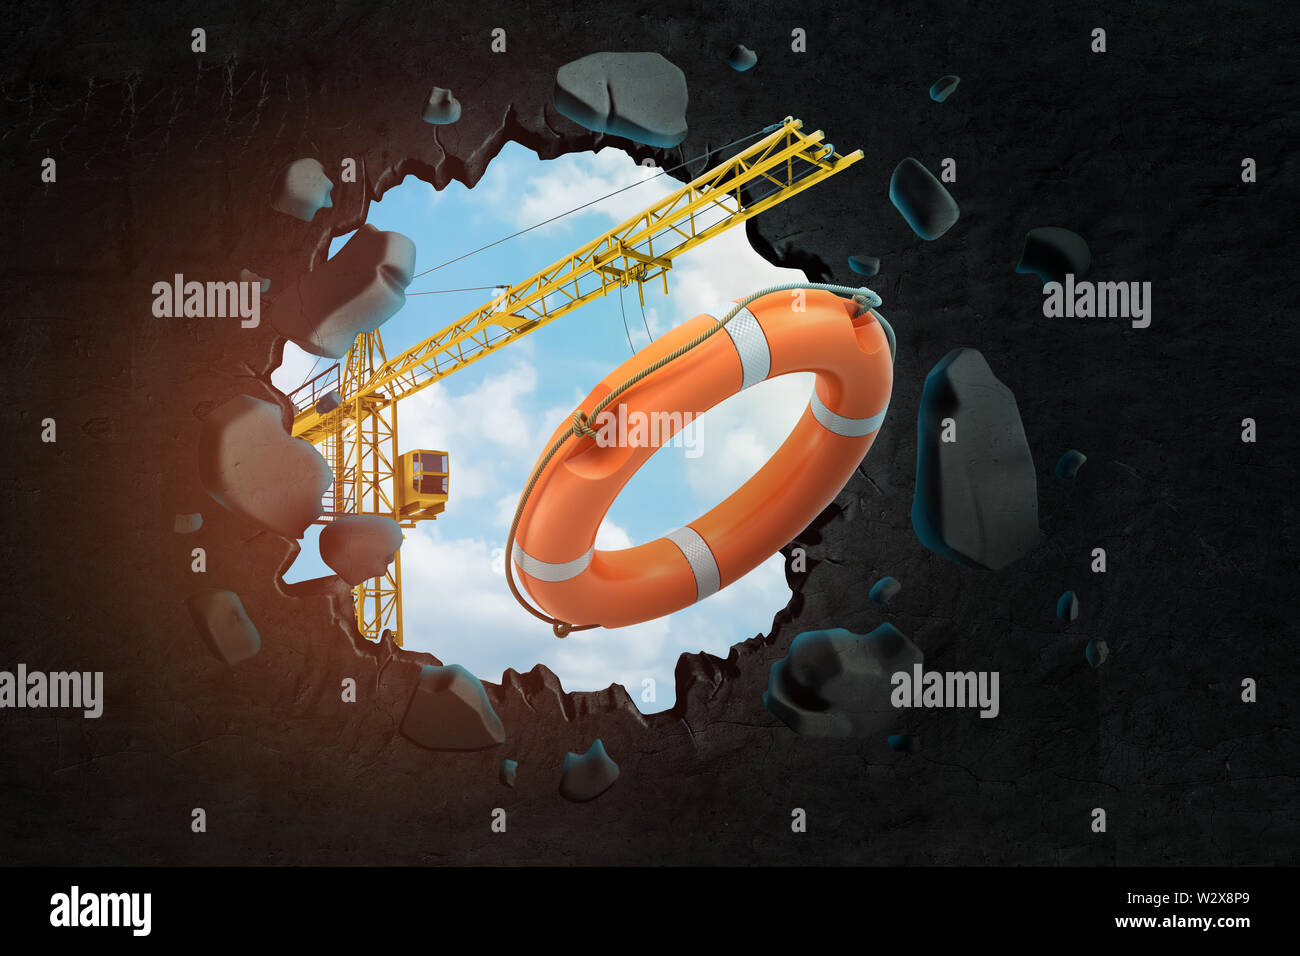 3d rendering of hoisting crane carrying orange lifebuoy and breaking hole in black wall with blue sky seen through. Stock Photo